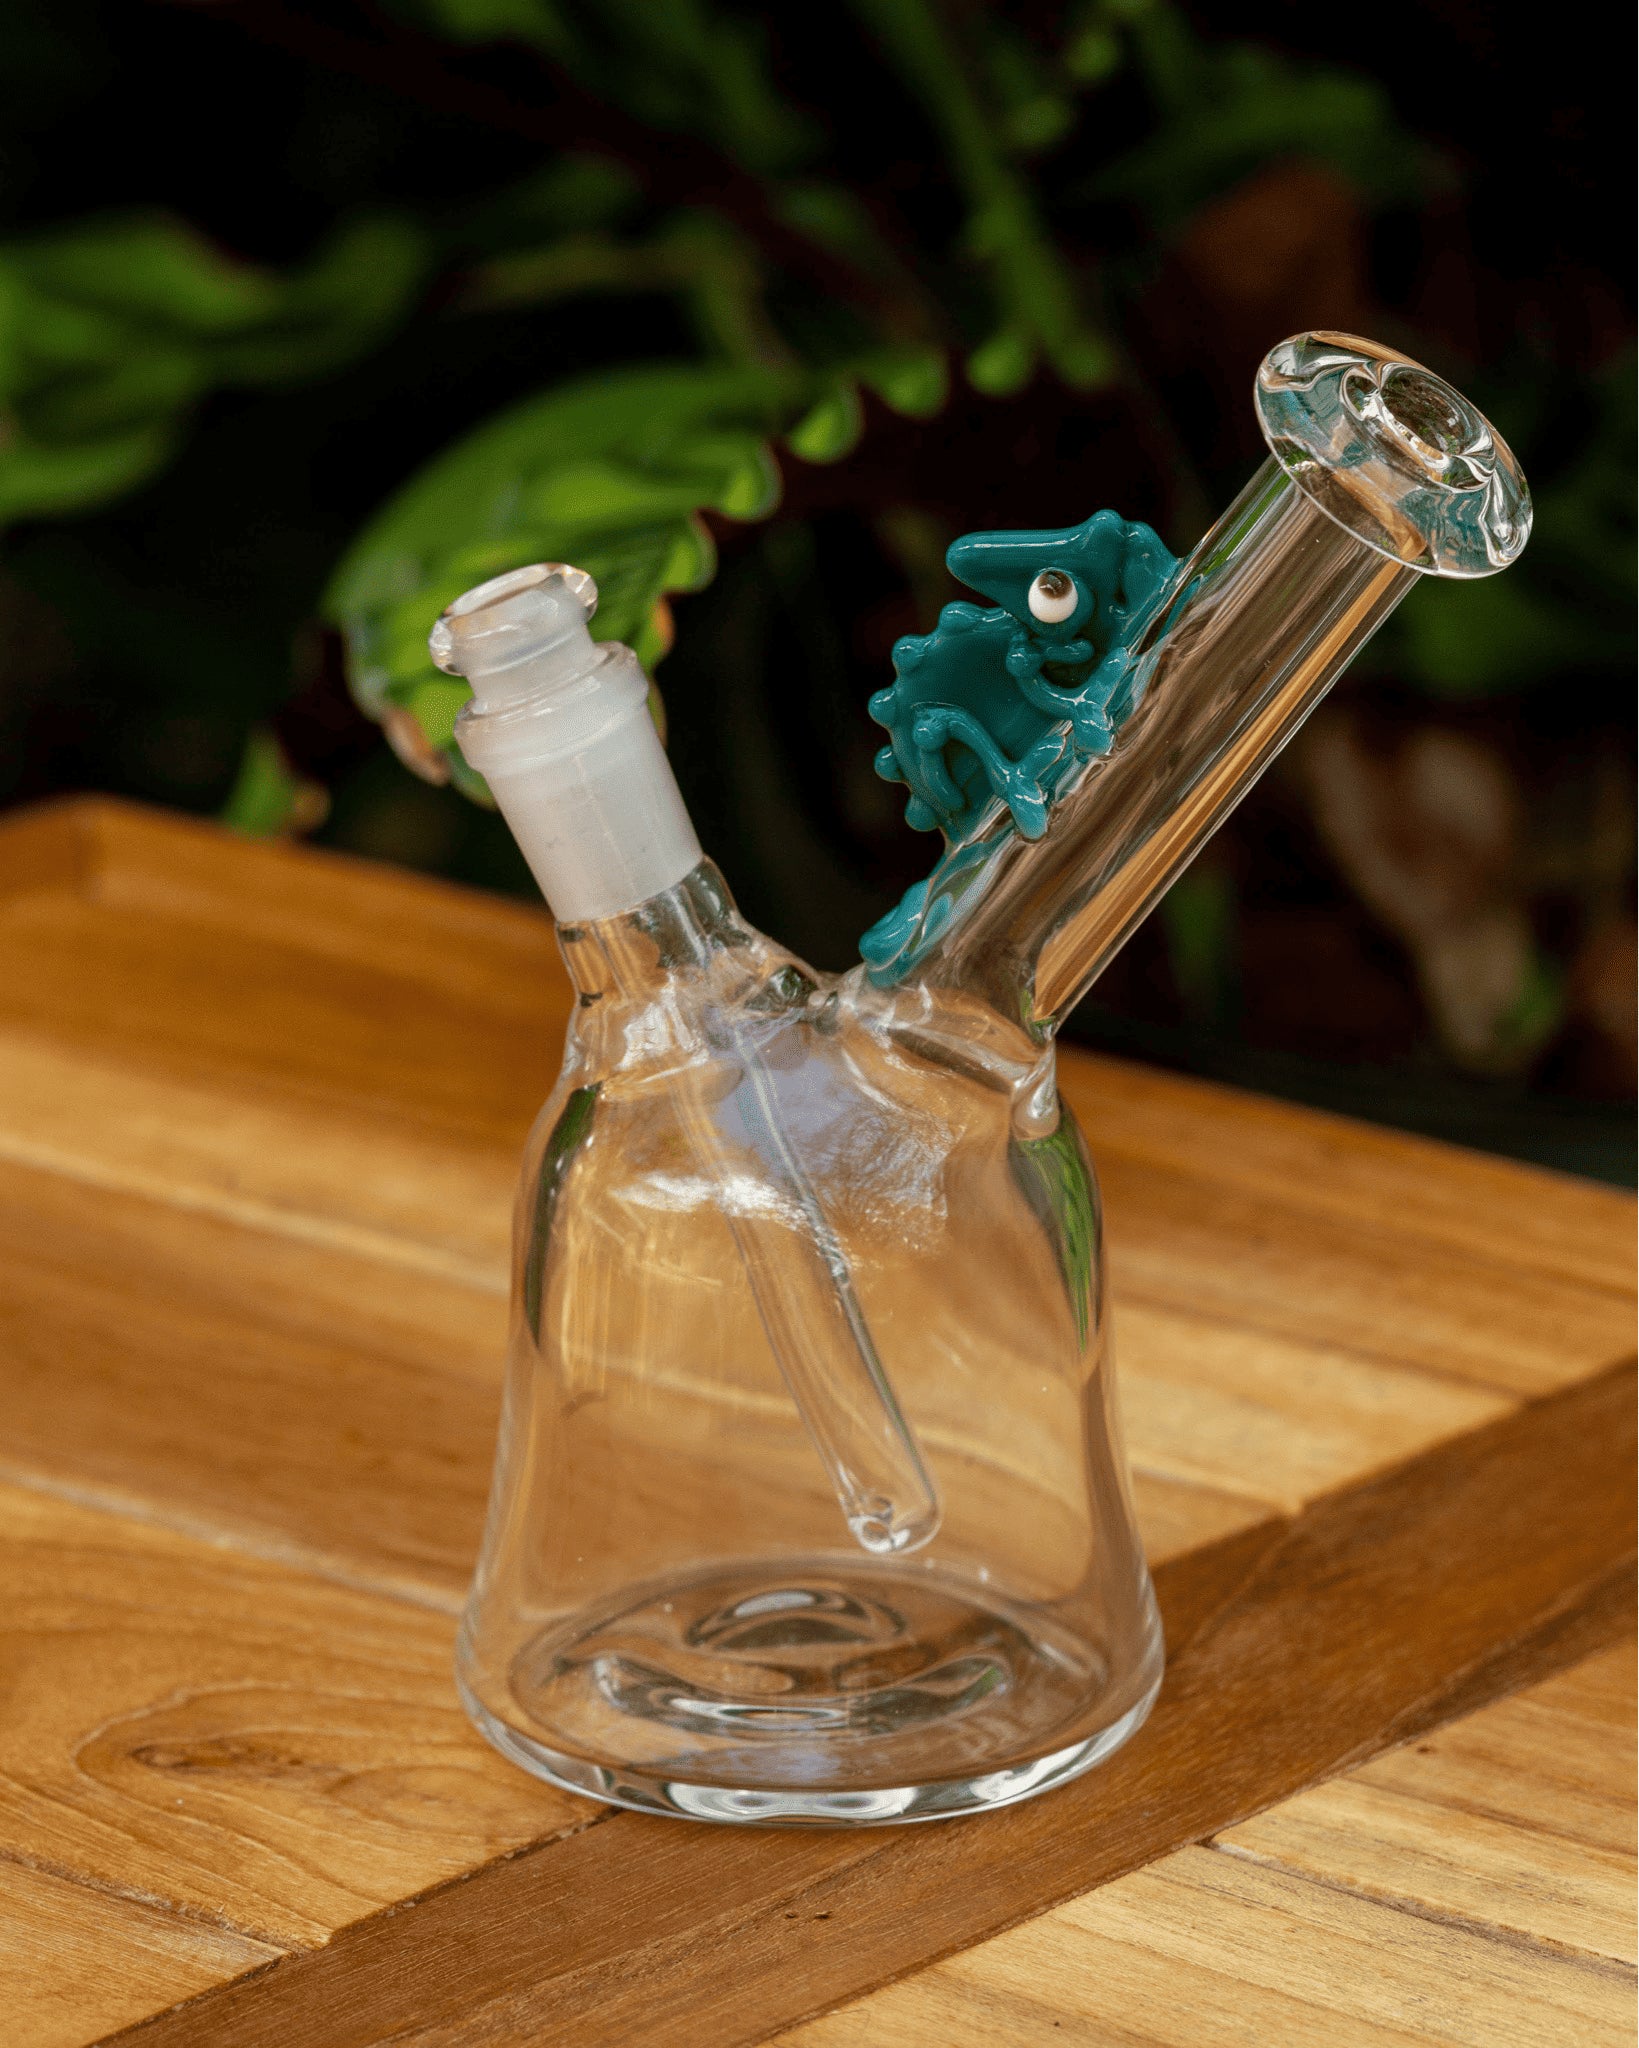 innovative design of the Clear Rig w/ Aqua Azul Chameleon (D) by Willy That Glass Guy